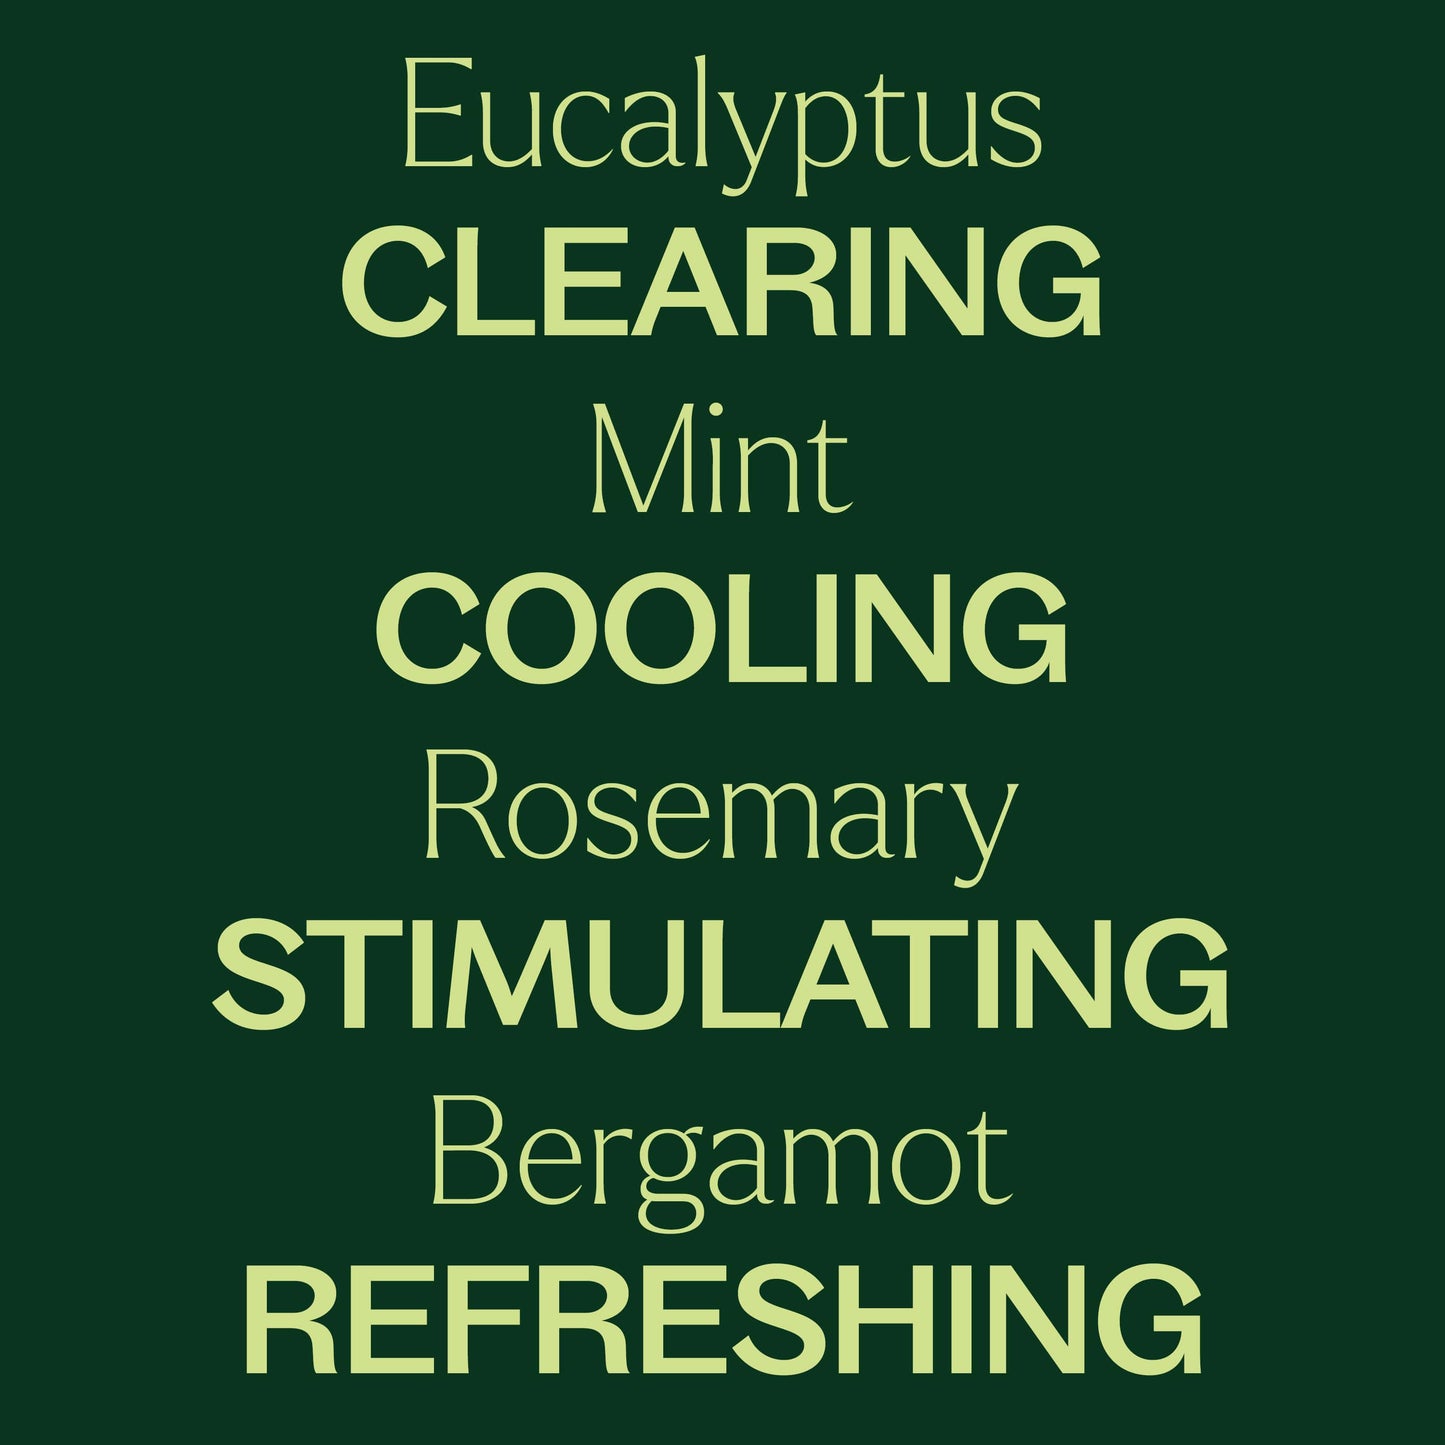 Eucalyptus Mint Body Oil is clearing, cooling, stimulating, refreshing